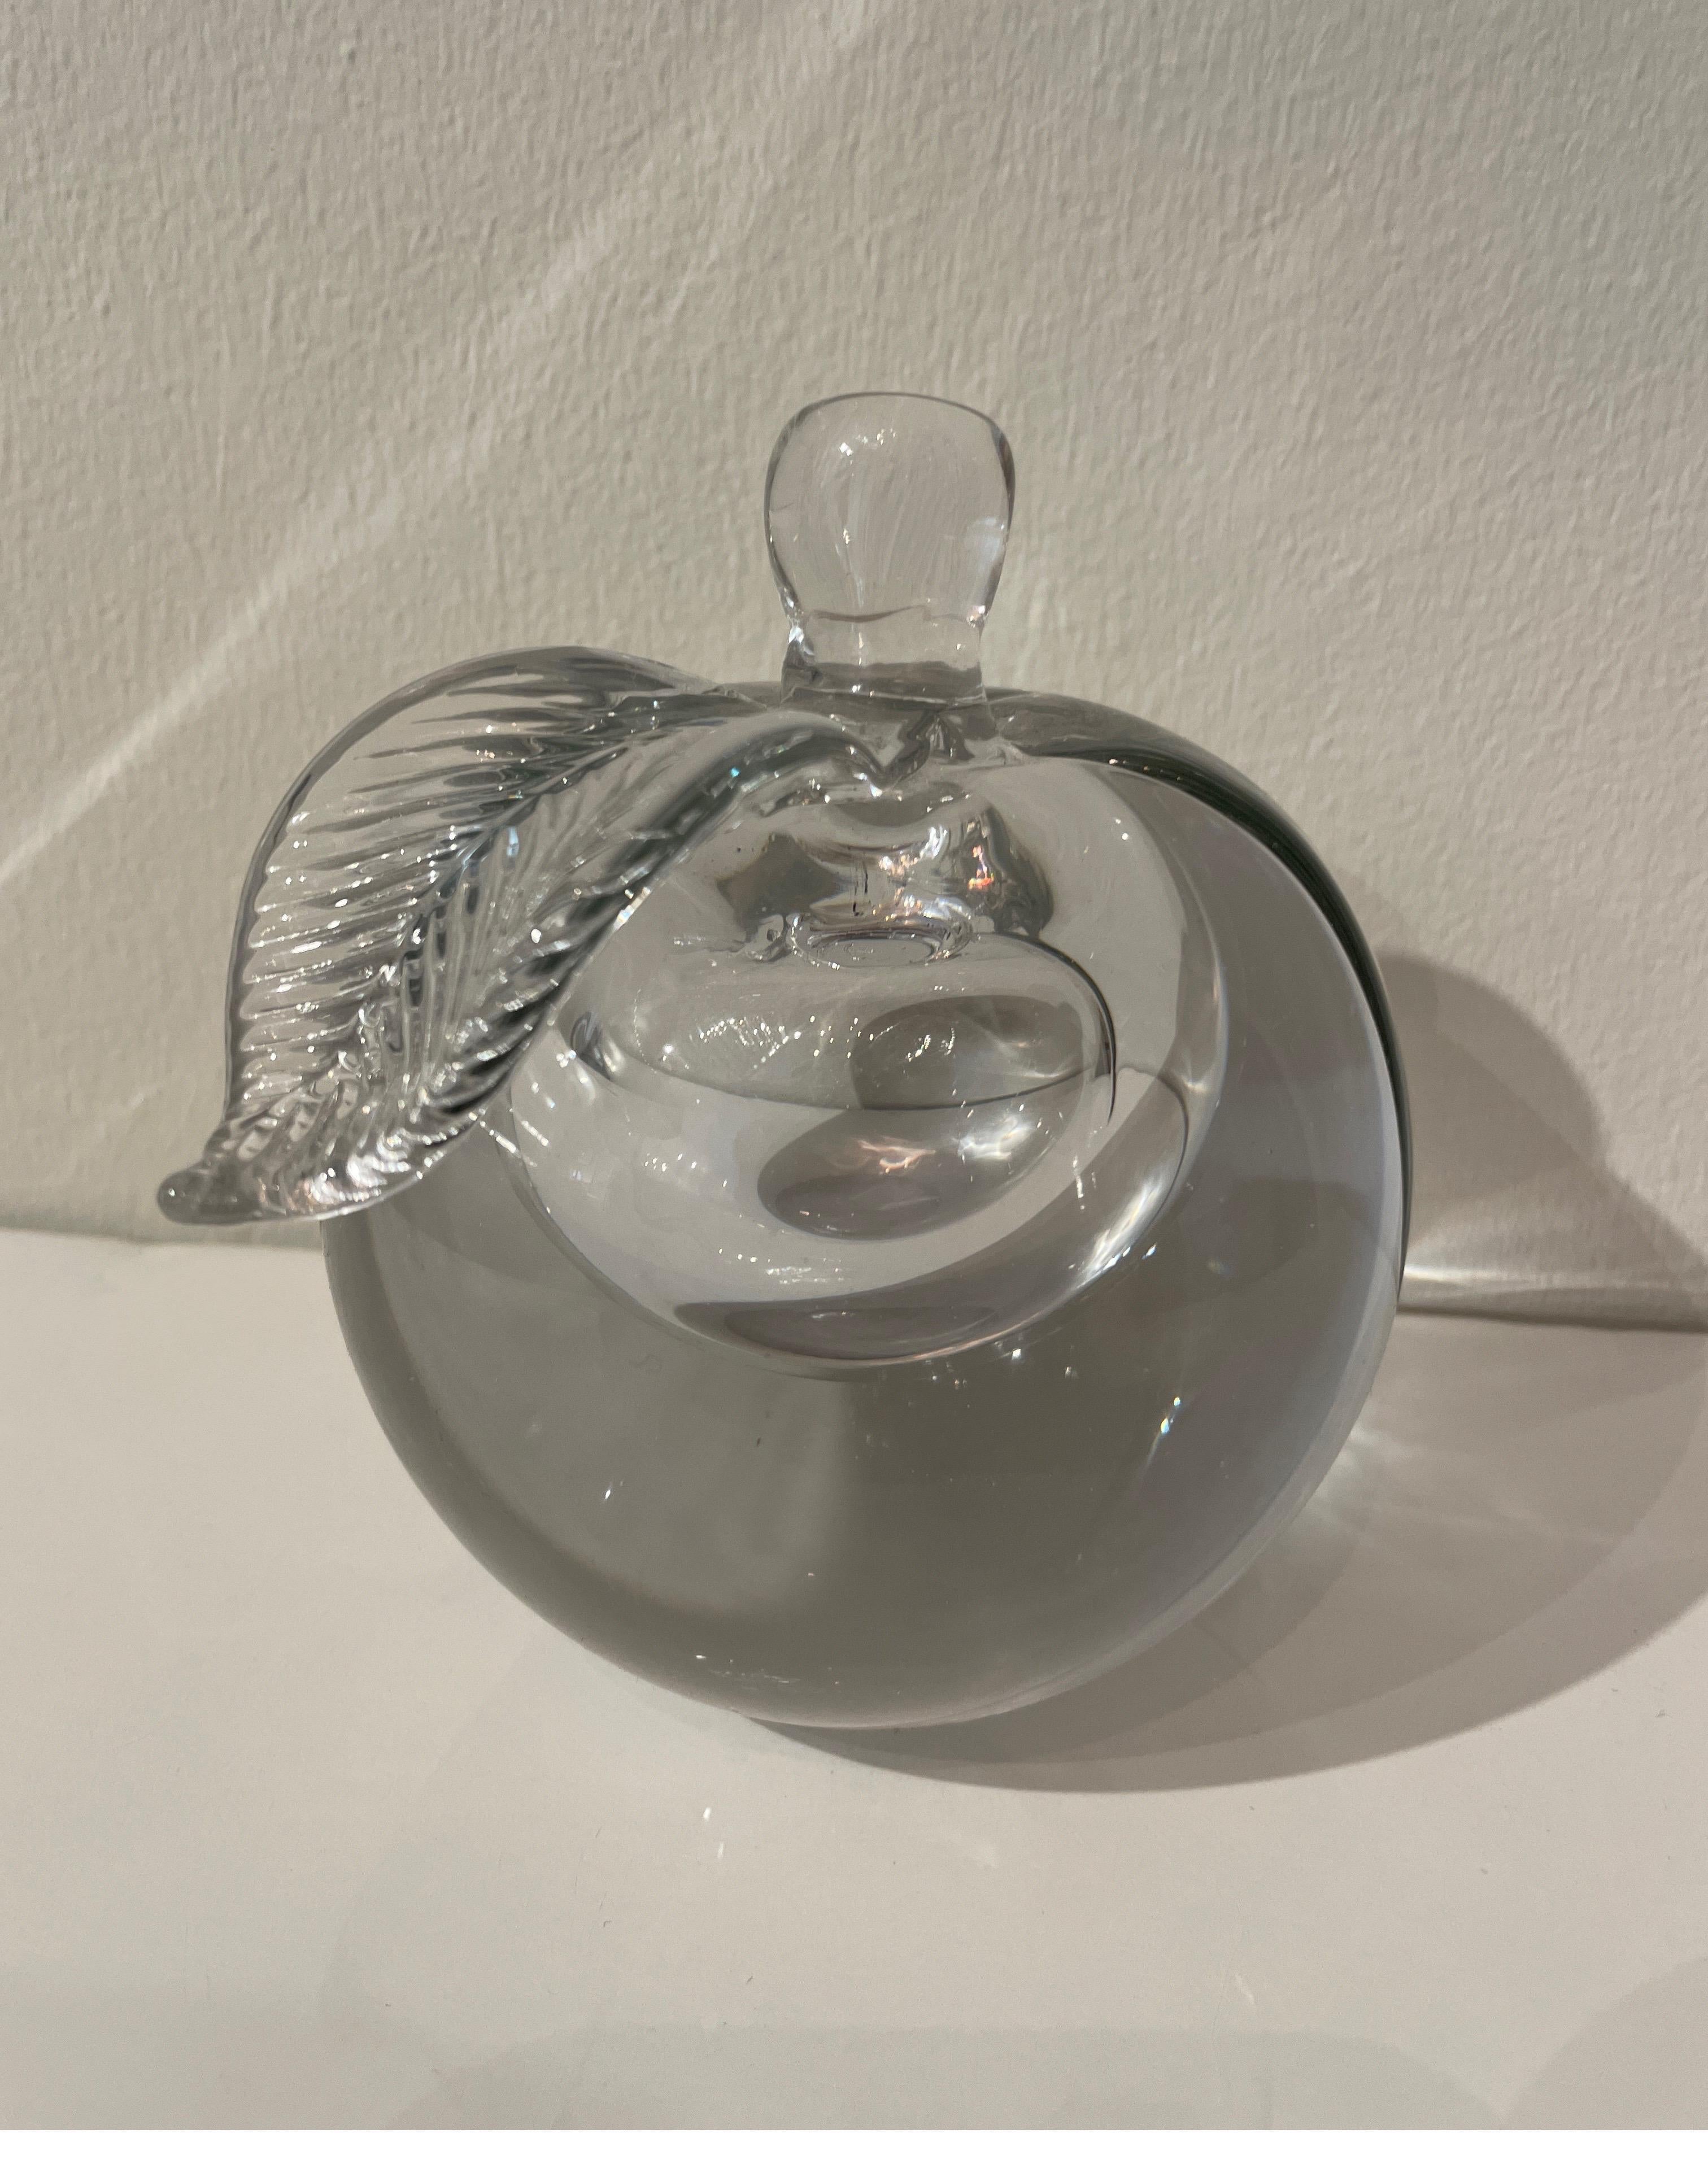 Clear glass Murano paperweight by Ogetti. This Mid-Century Modern piece will look great on any desk. A classic !